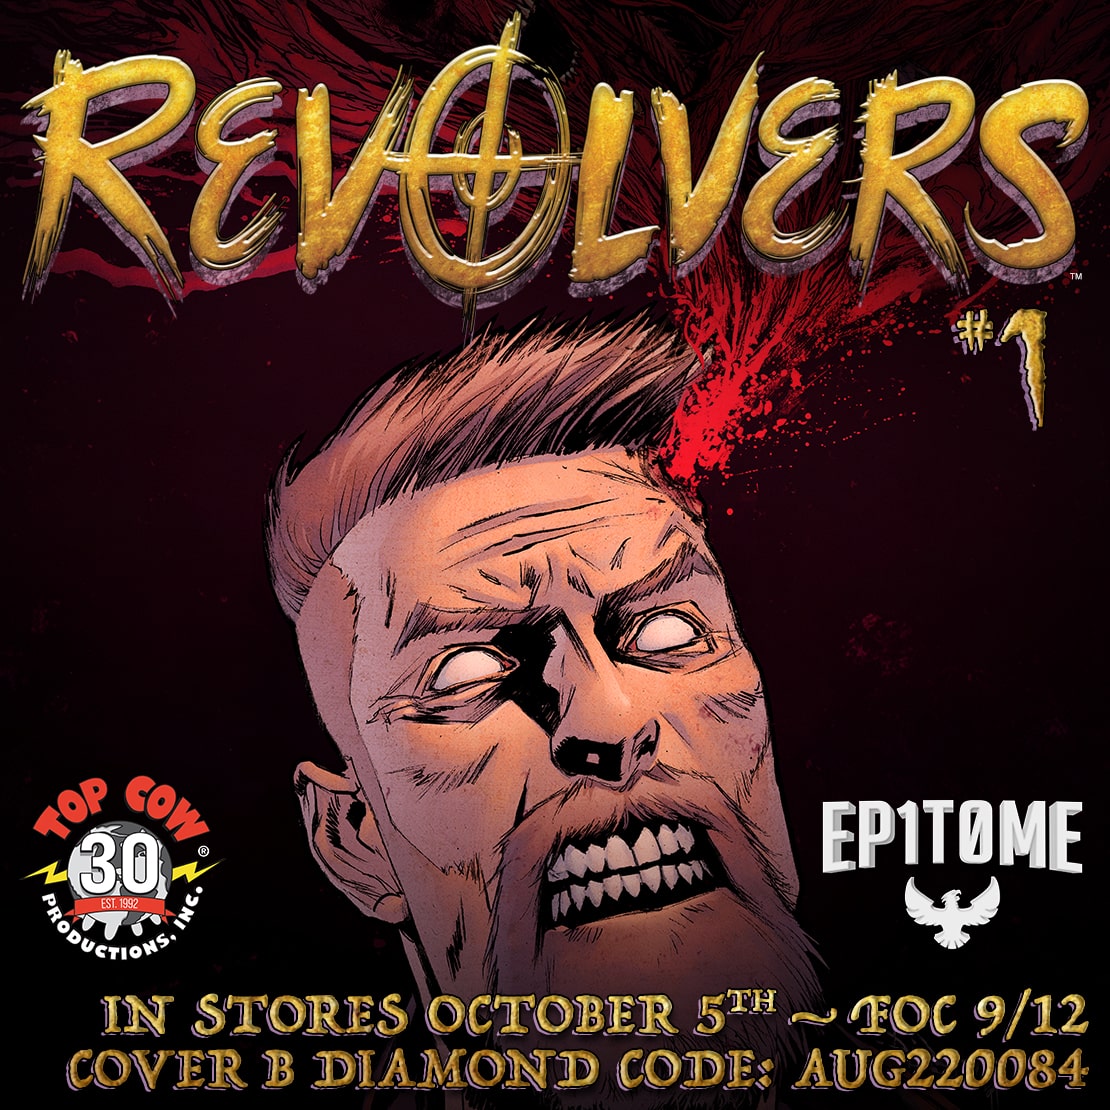 Top Cow launching 'Revolvers' sci-fi crime drama October 5th